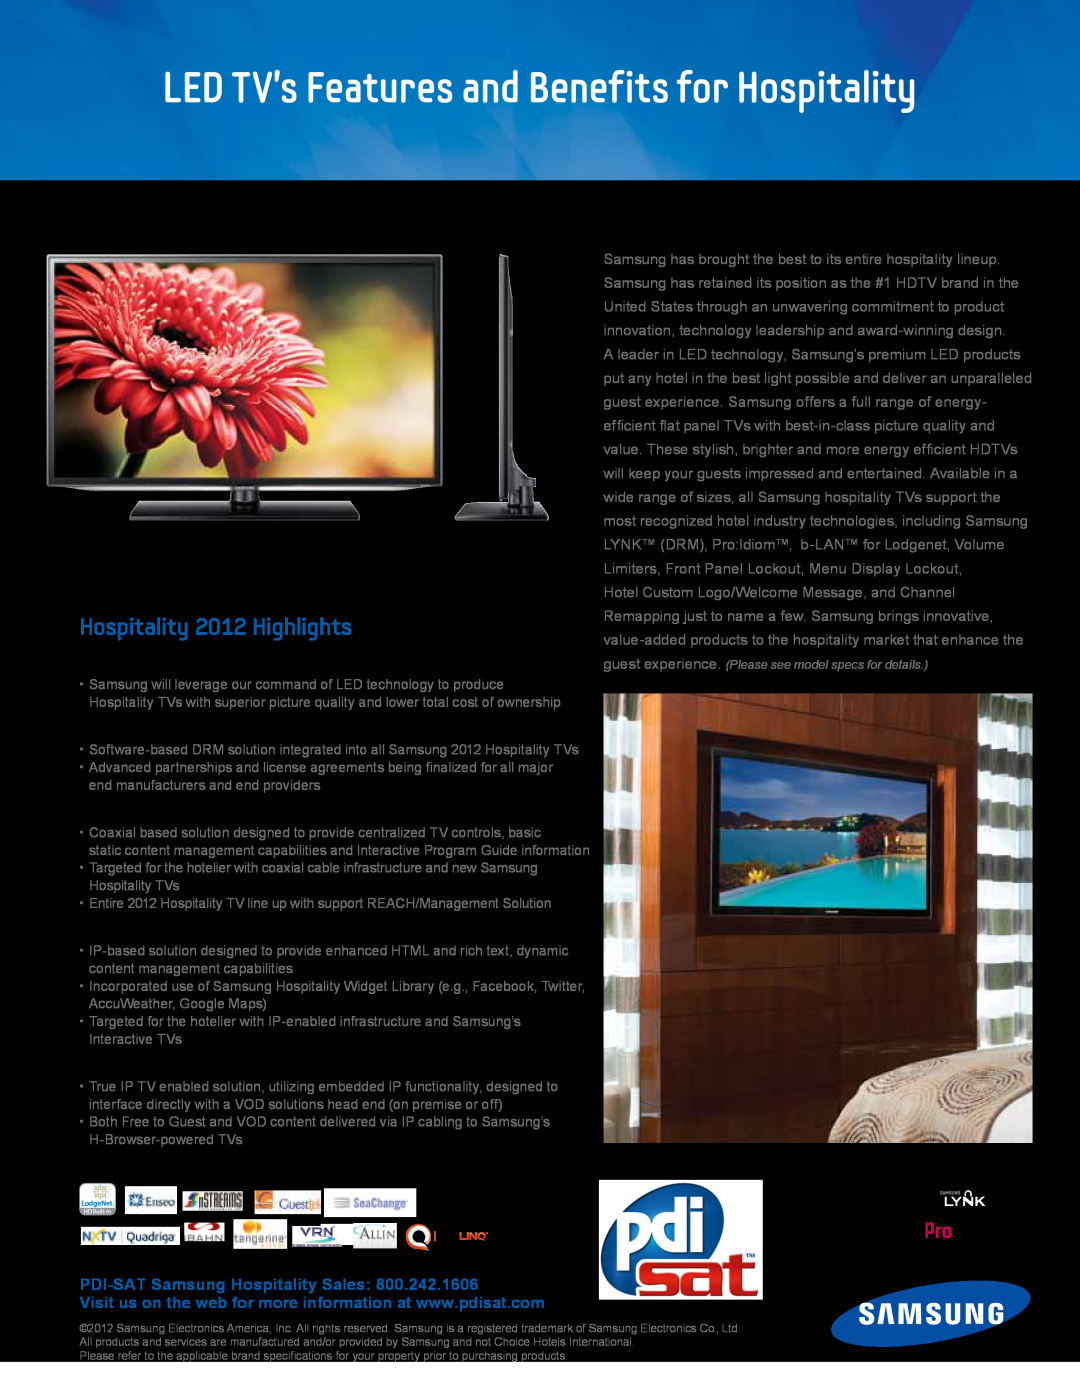 Samsung HG46NA790MFXZA LED TVs Features and Benefits for Hospitality, Hospitality 2012 Highlights, Samsung LYNK, H-Browser 